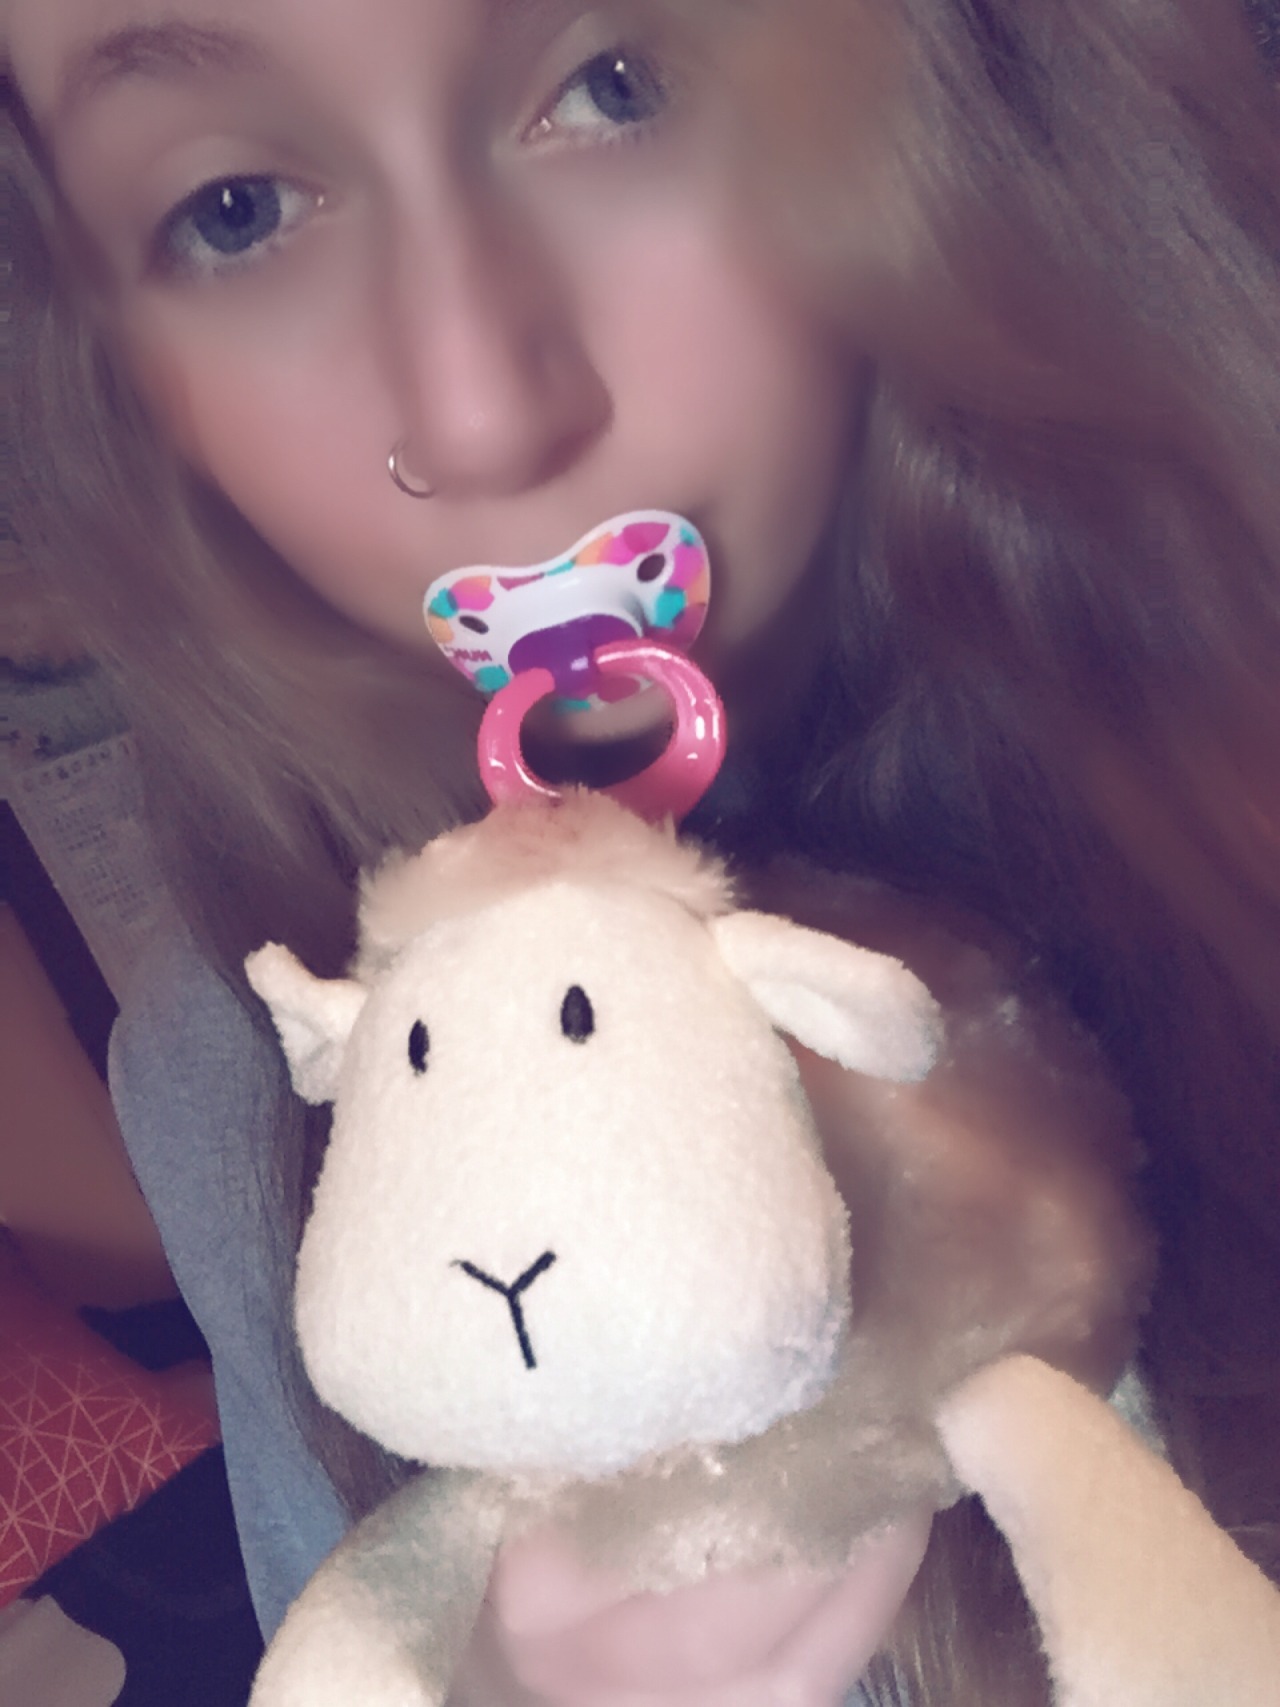 little-livy:  Took a mini photoshoot with the new stuffies Daddy bought me recently!